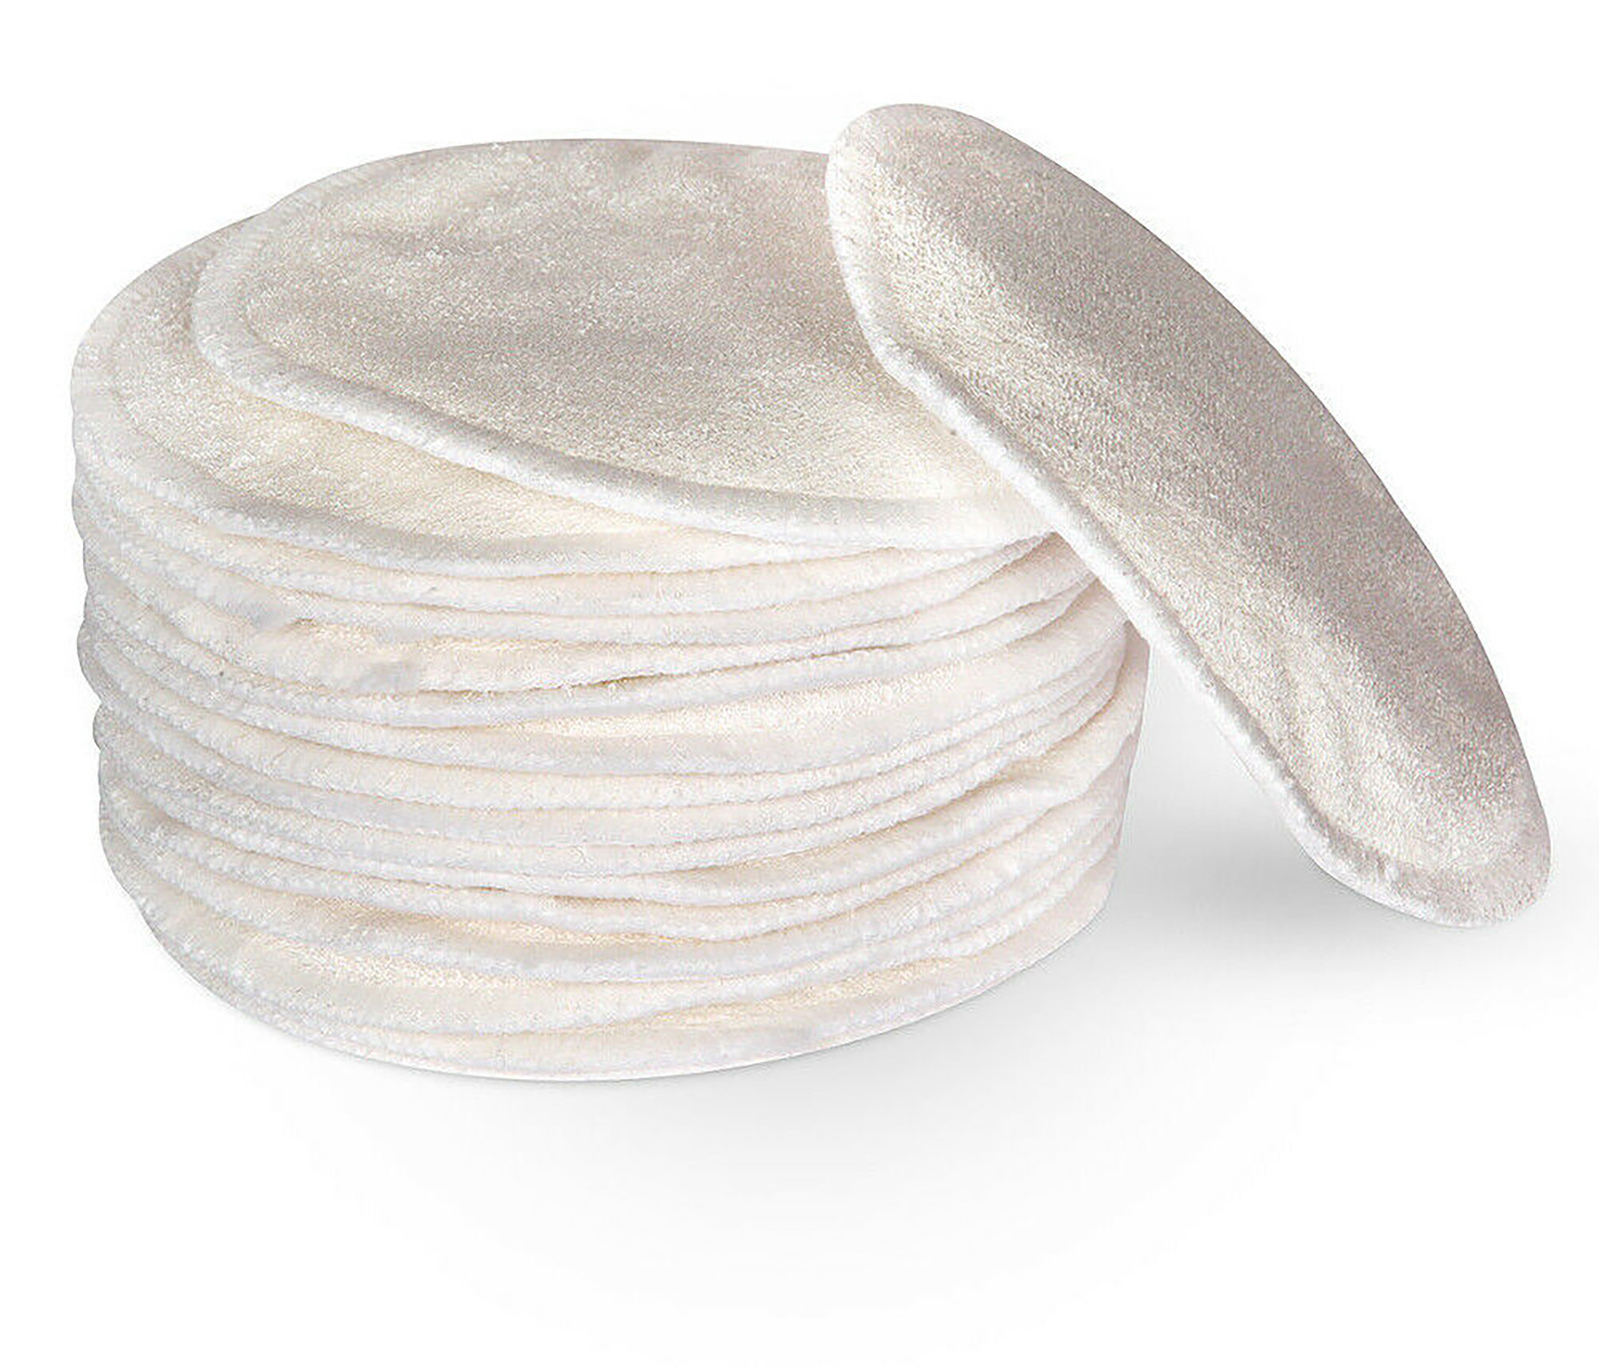 Round Bamboo Washable Maternity Pads, cream colored in a pile of about 20. Kindy Ecobaby